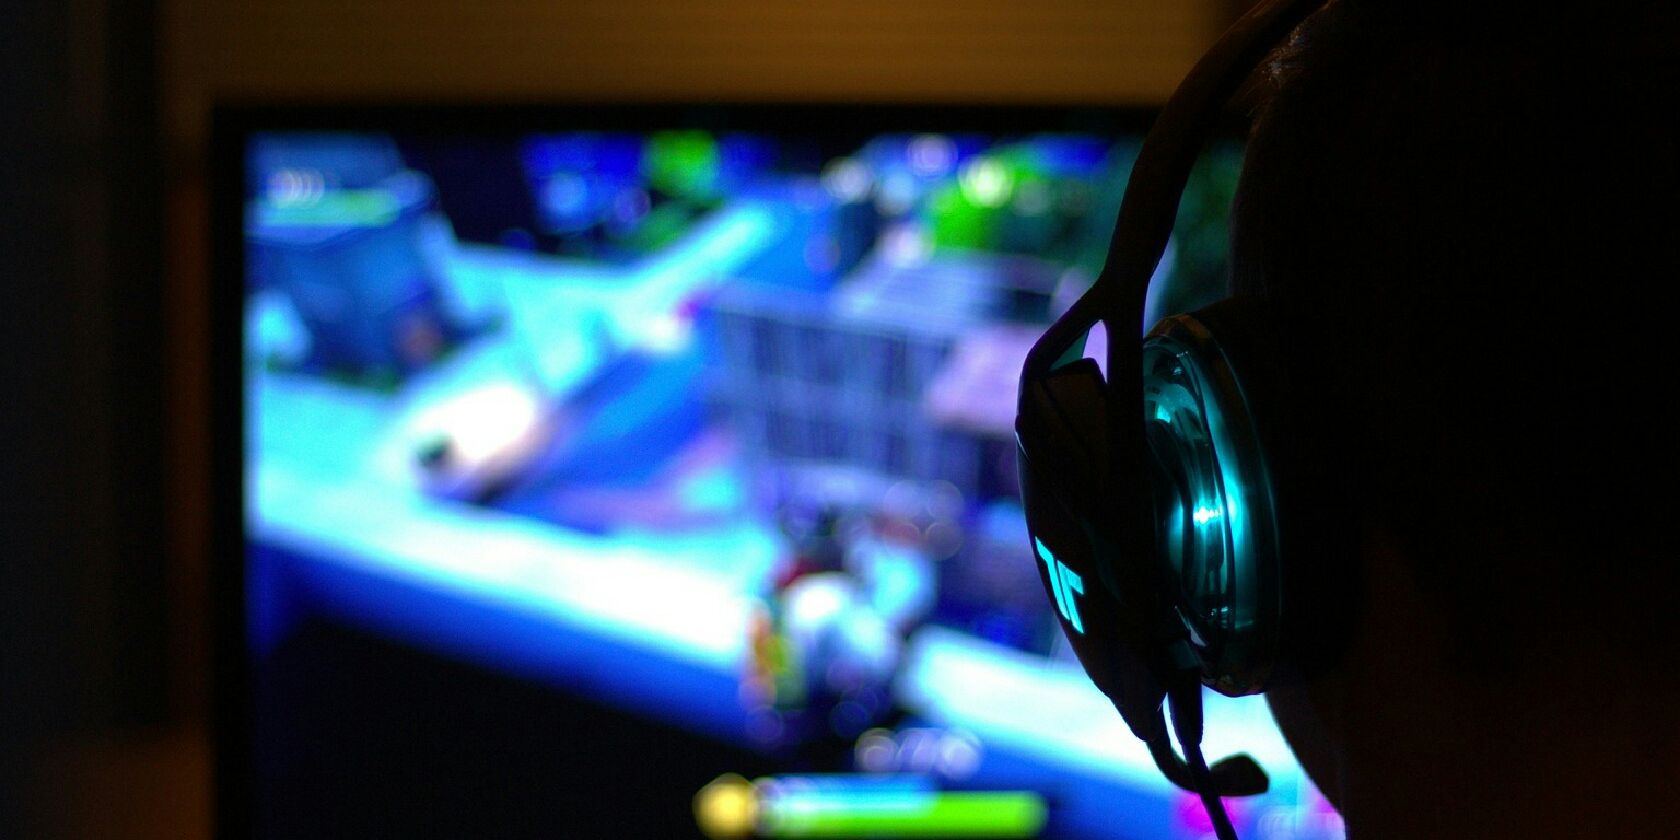 IMPROVE your cloud gaming experience with these simple TIPS! [Sponsored] 